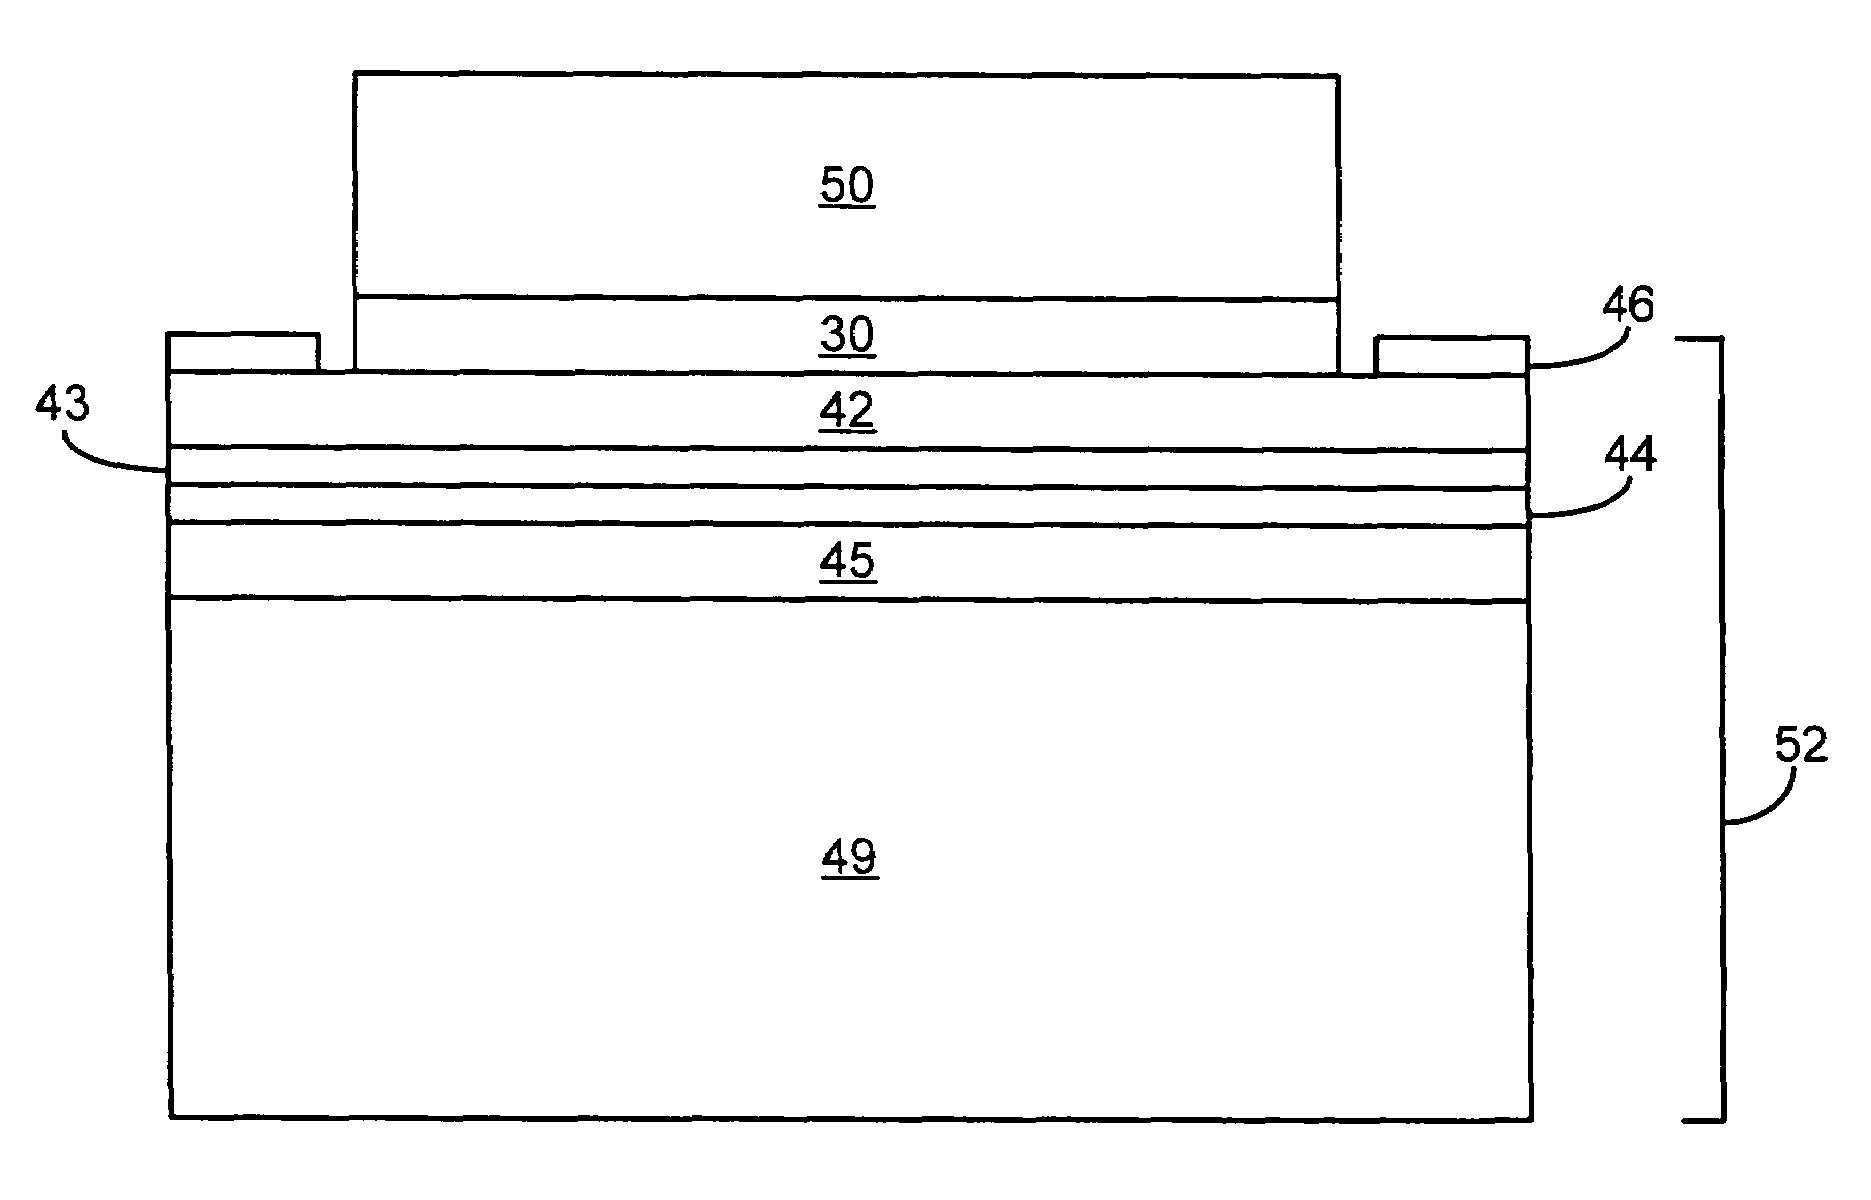 Luminescent ceramic for a light emitting device